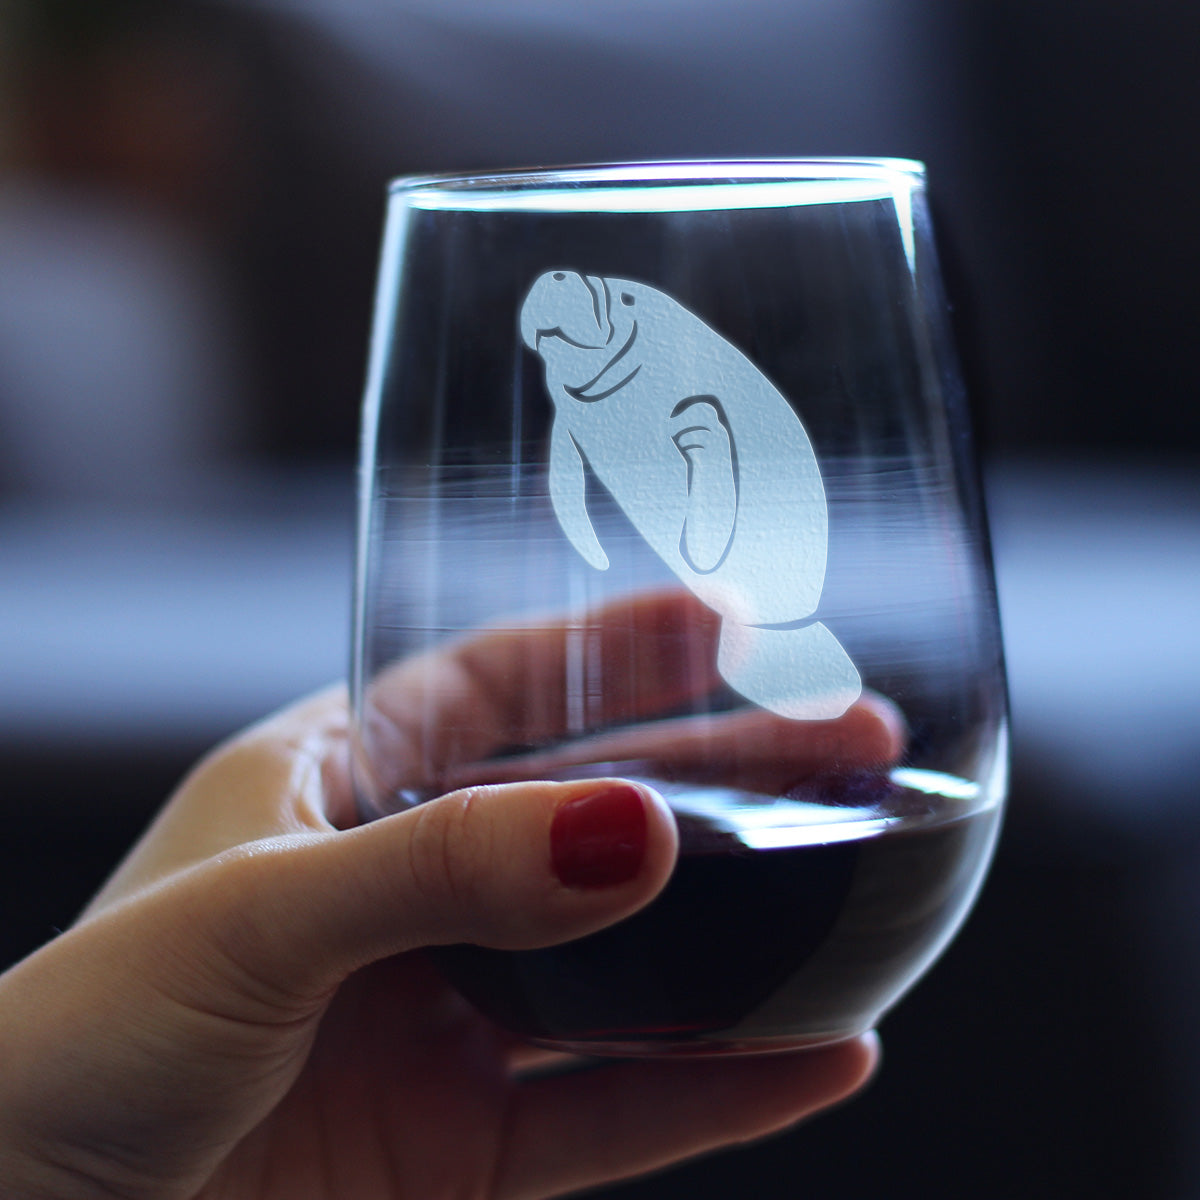 Manatee Stemless Wine Glass - Cute Funny Ocean Animals Themed Decor and Gifts for Sea Creature Lovers - Large 17 Oz